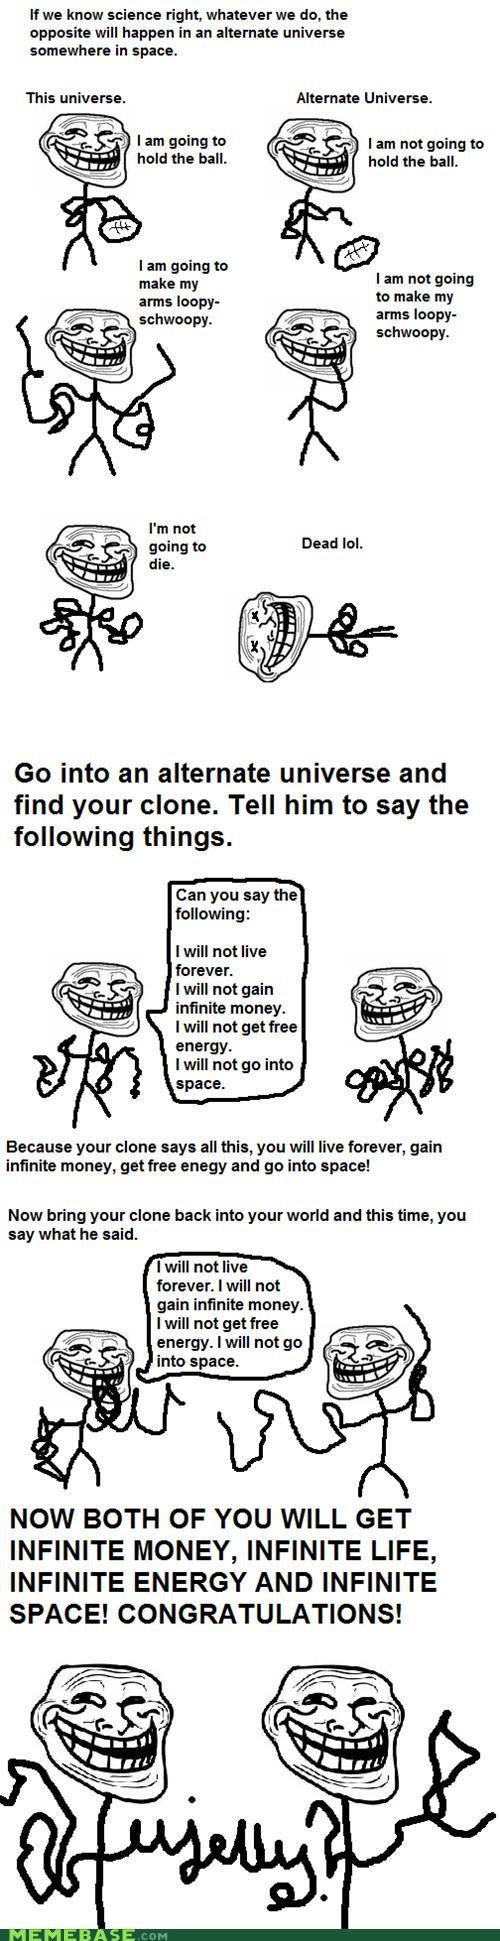 Troll theories: alternate universes. credit: memebase. If we know science right, whatever we do, the opposite will happen in an alternate universe somewhere in 